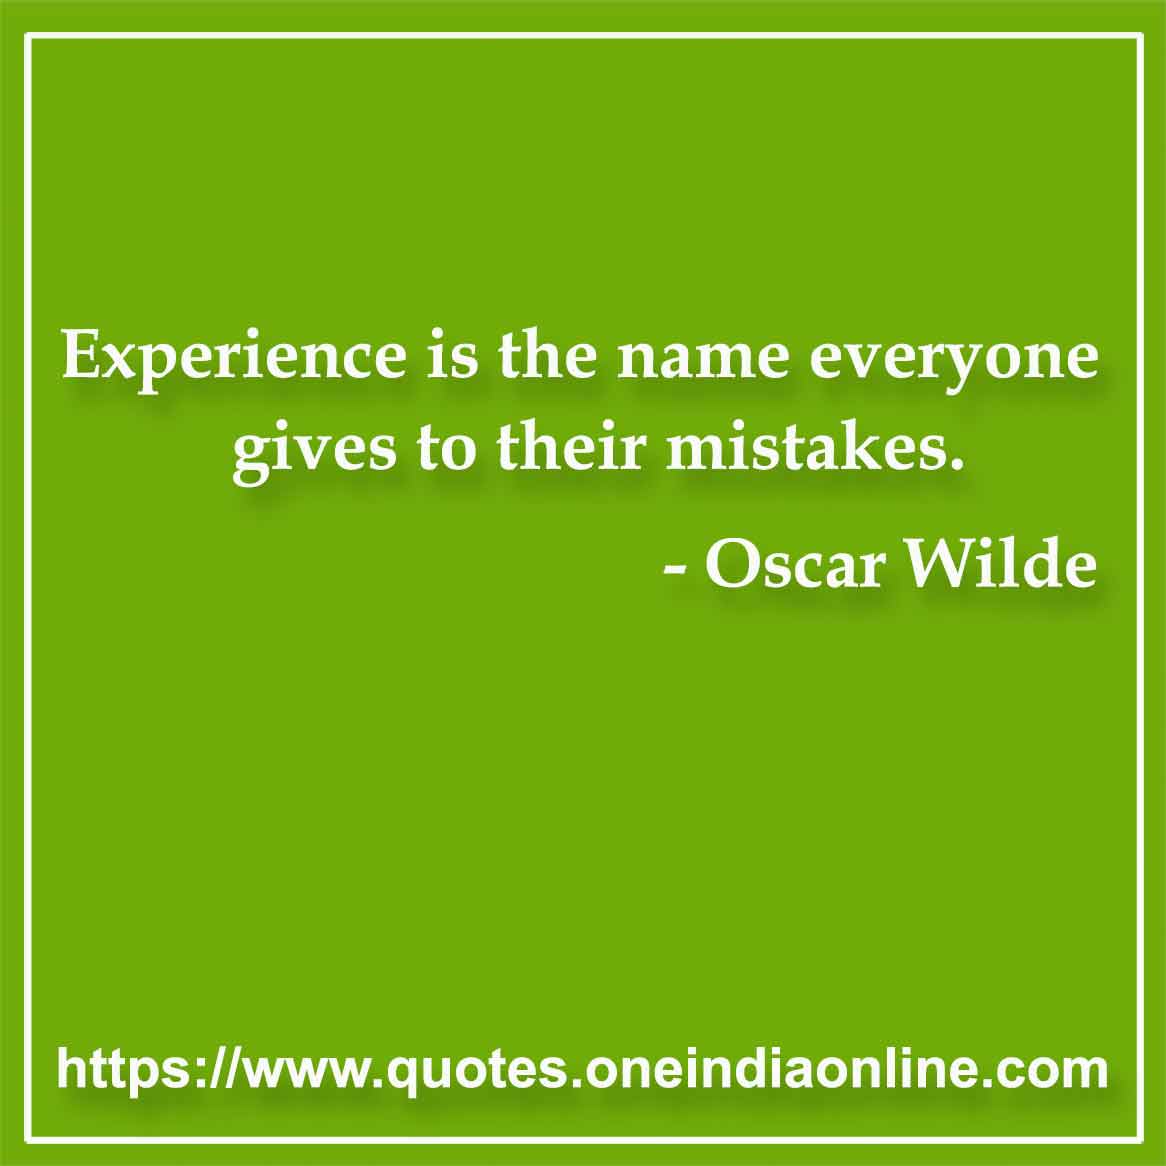 Experience is the name everyone gives to their mistakes.

- Oscar Wilde Quotes